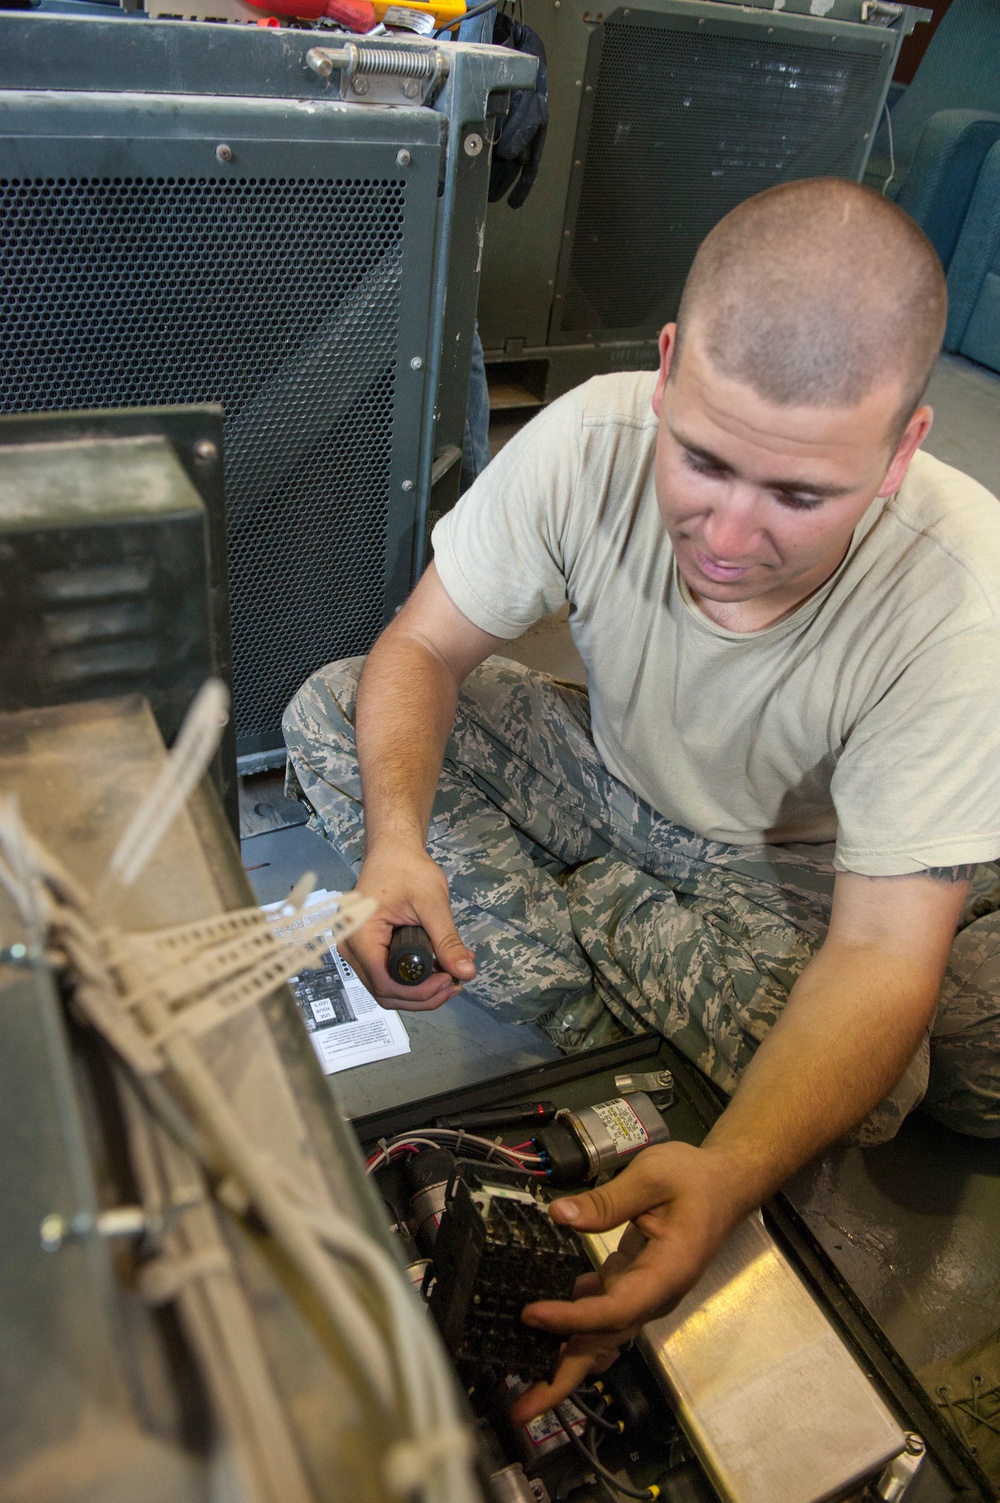 USAFE Airmen integrate, coordinate continuing 39th ABW missions